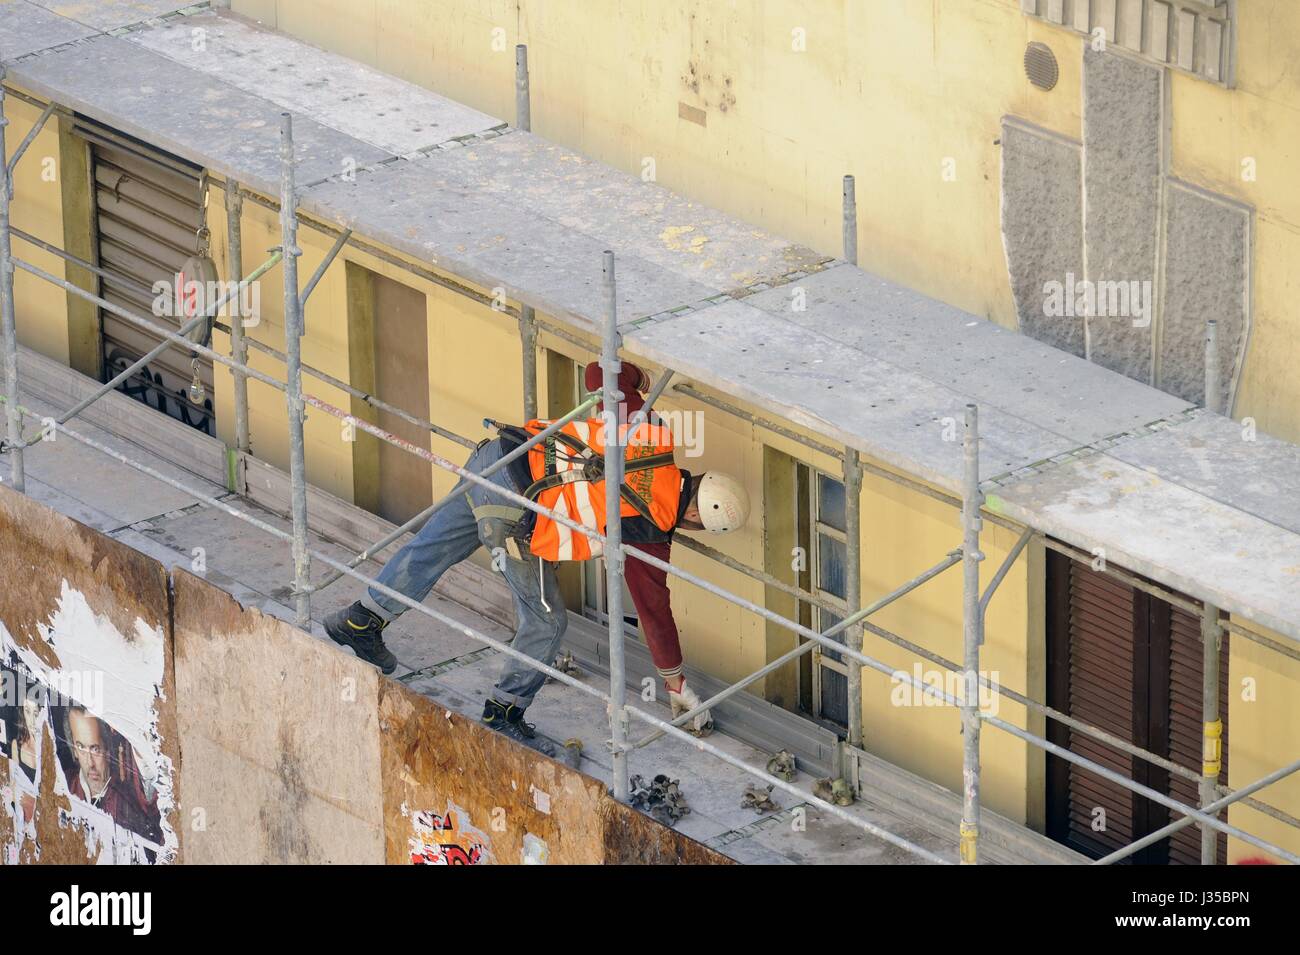 Construction workers on the scaffolding for the renovation of a building Stock Photo